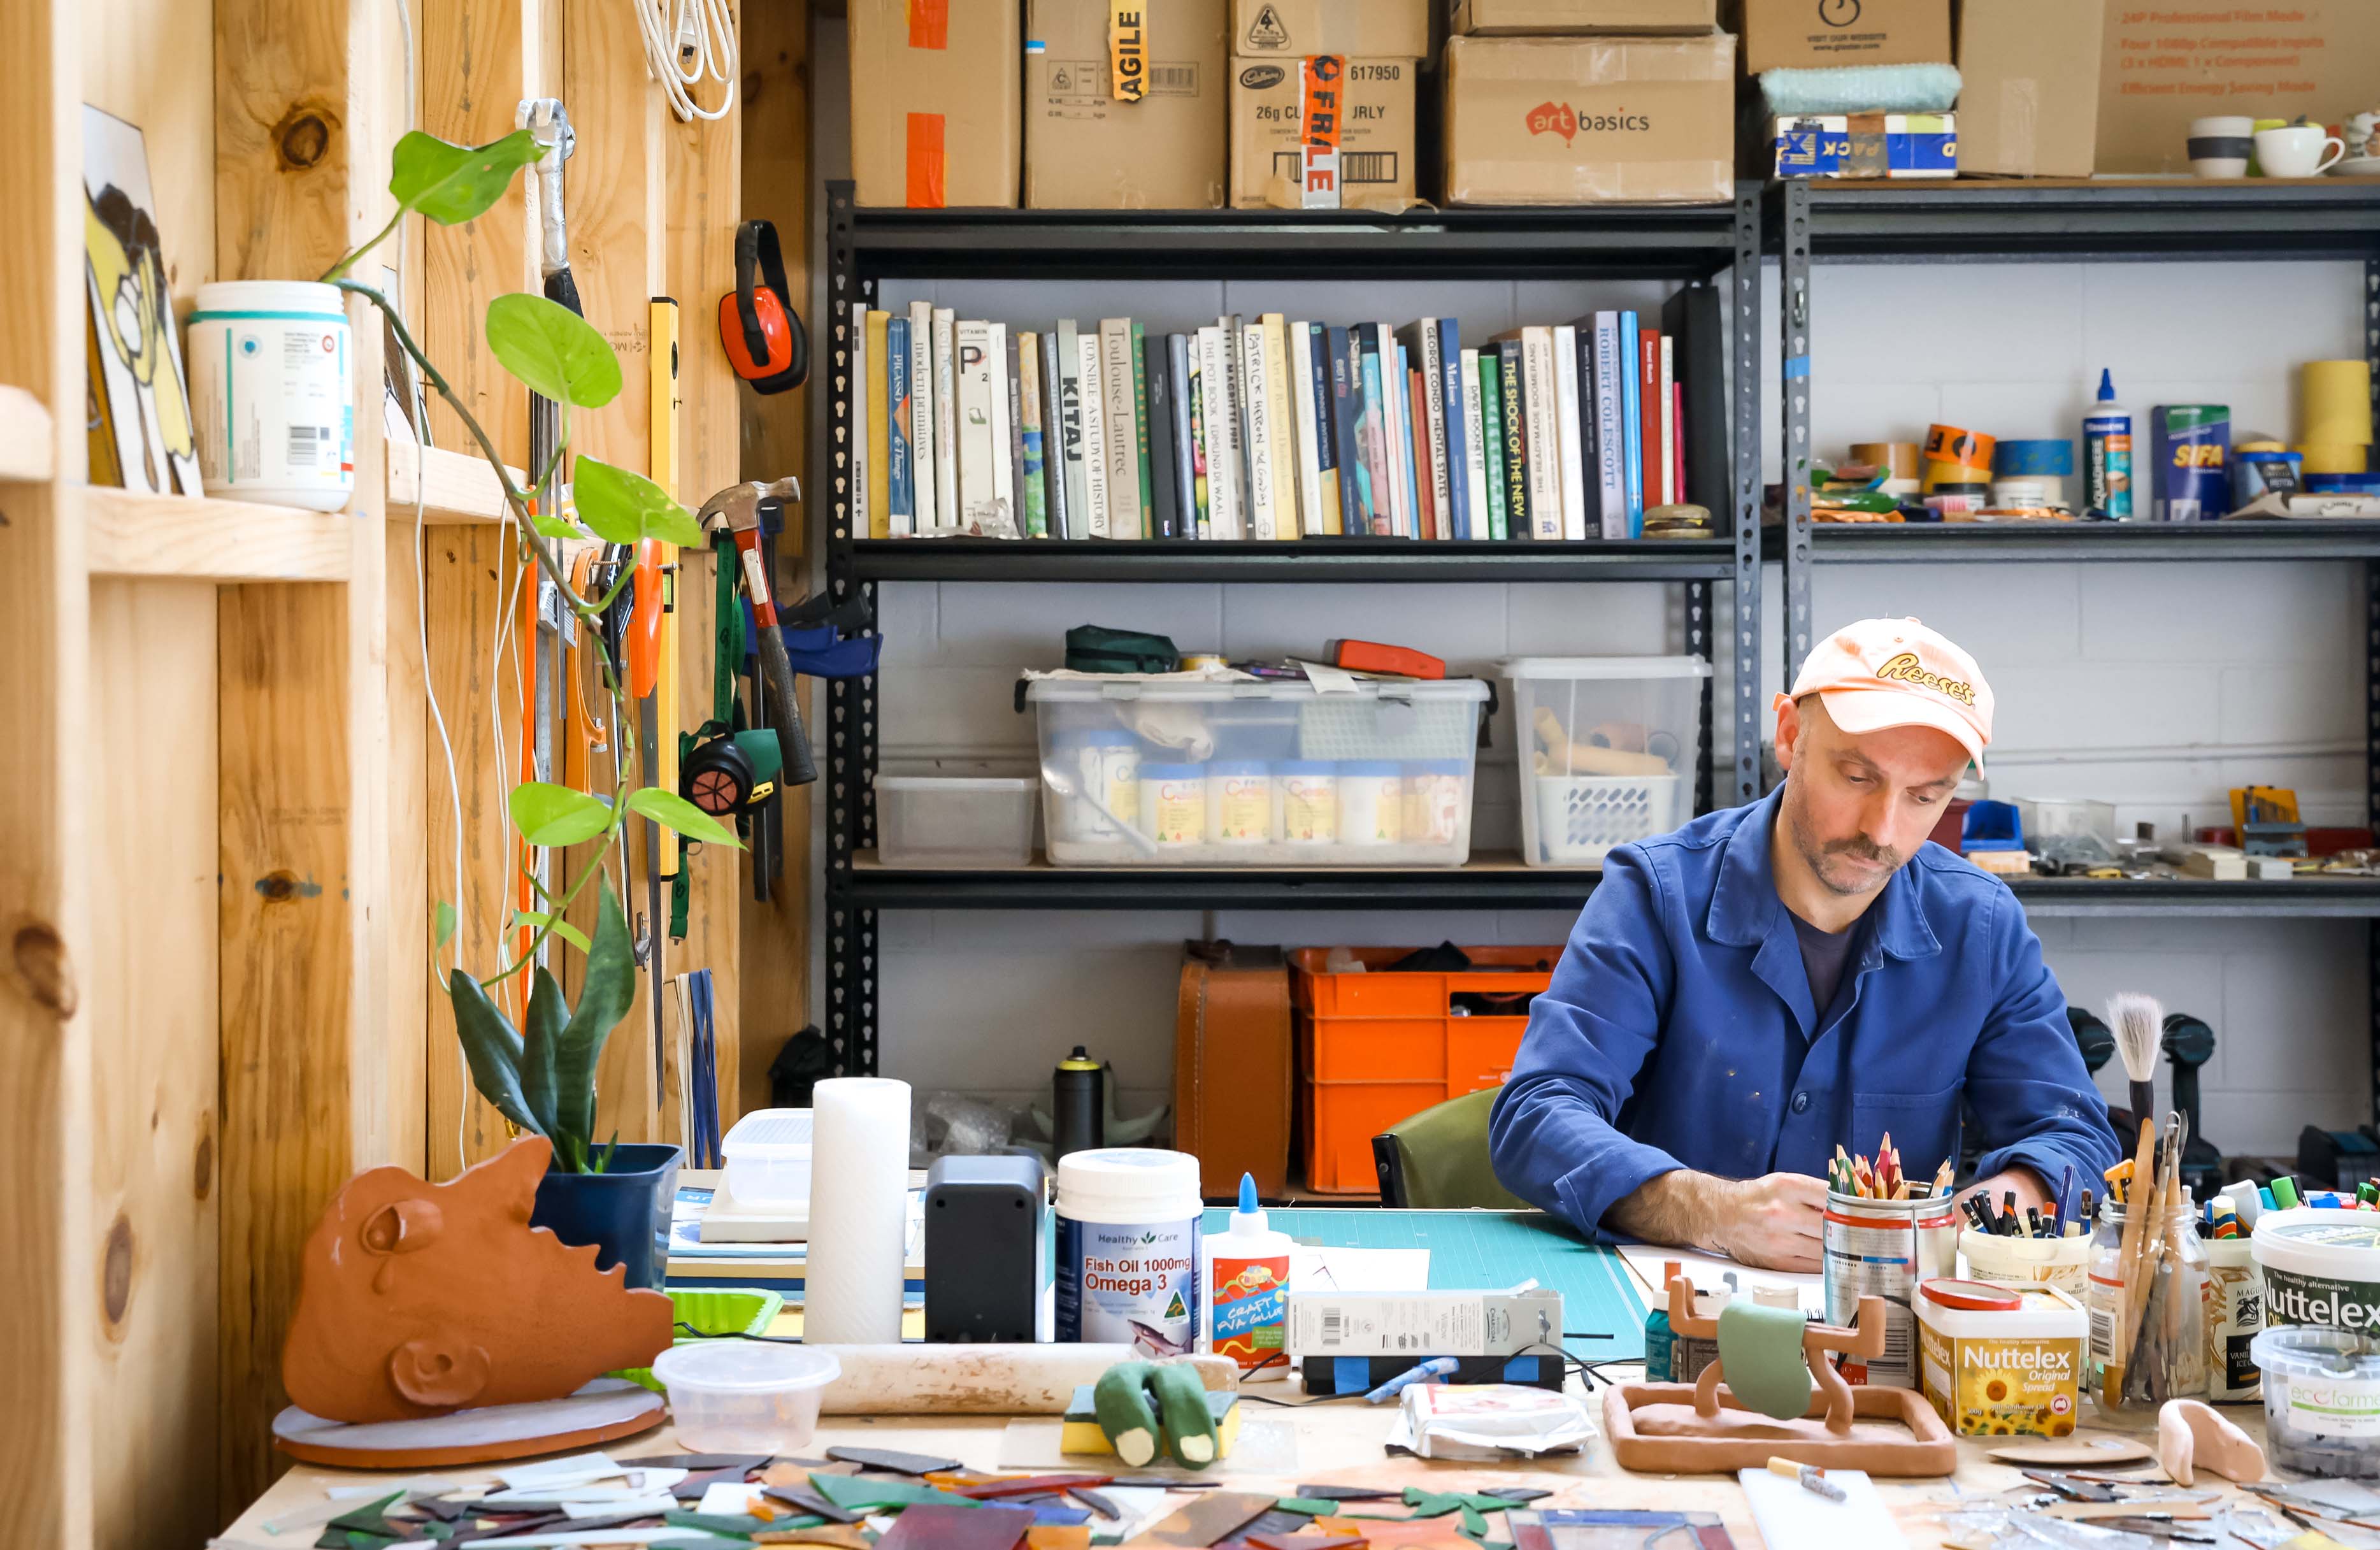 A man in a blue shirt and white cap works at a table filled with art studio materials